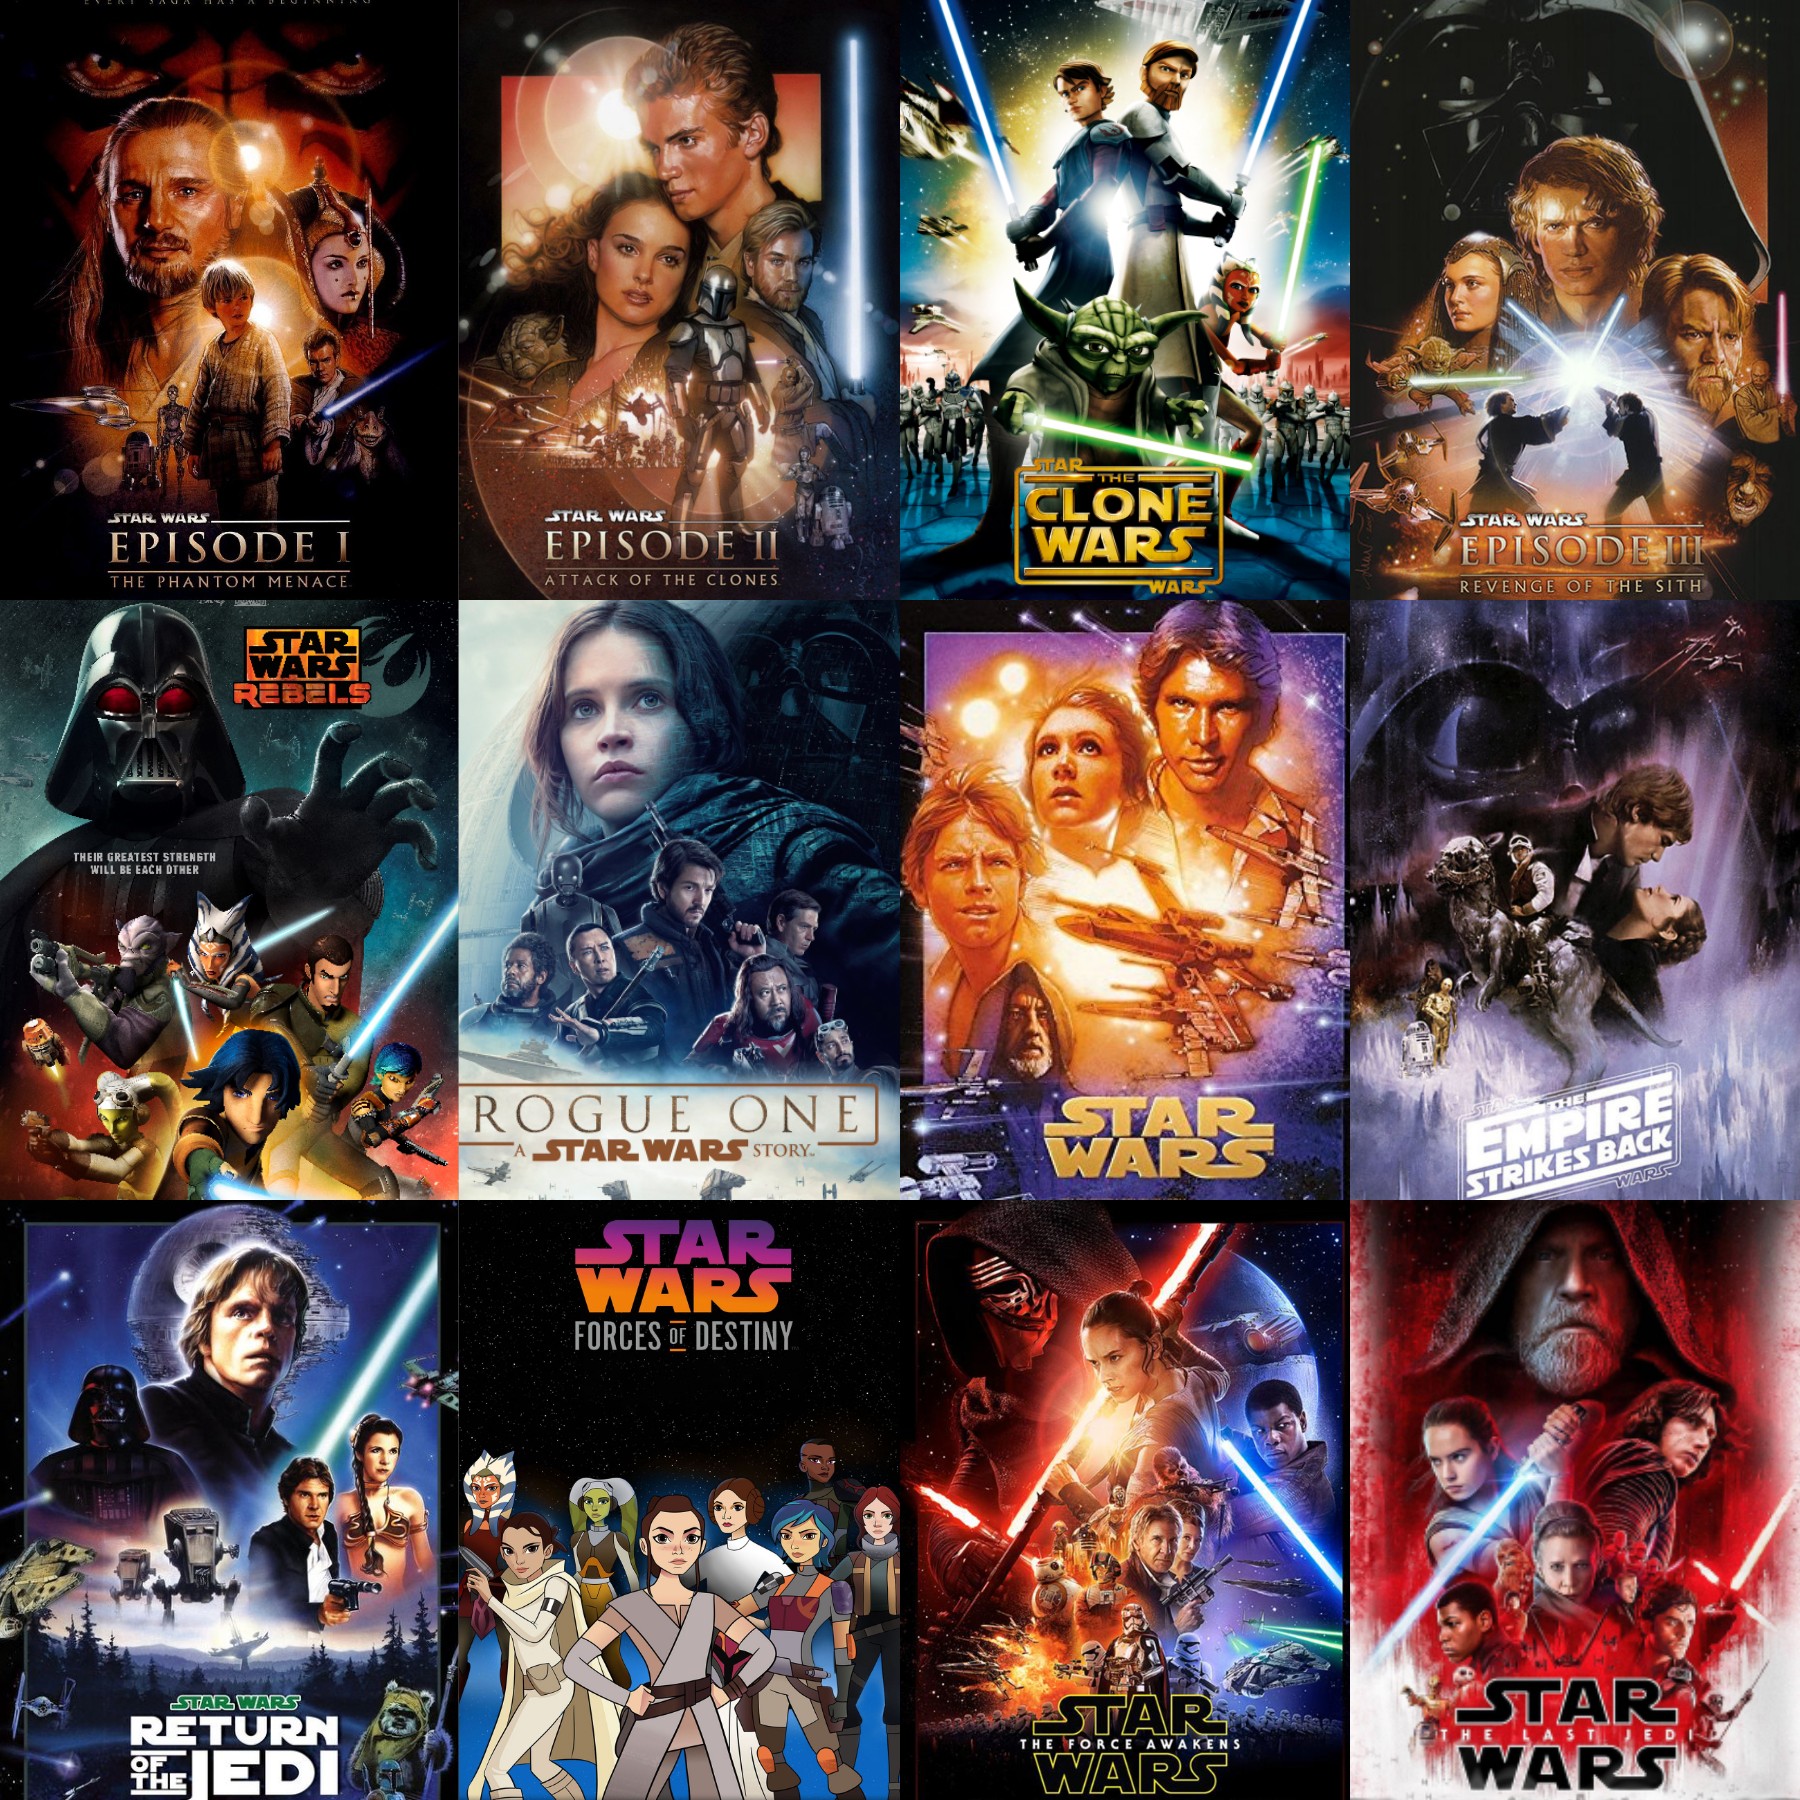 What "Star Wars" Films & Popular Franchise Movies Rank Best To Worst